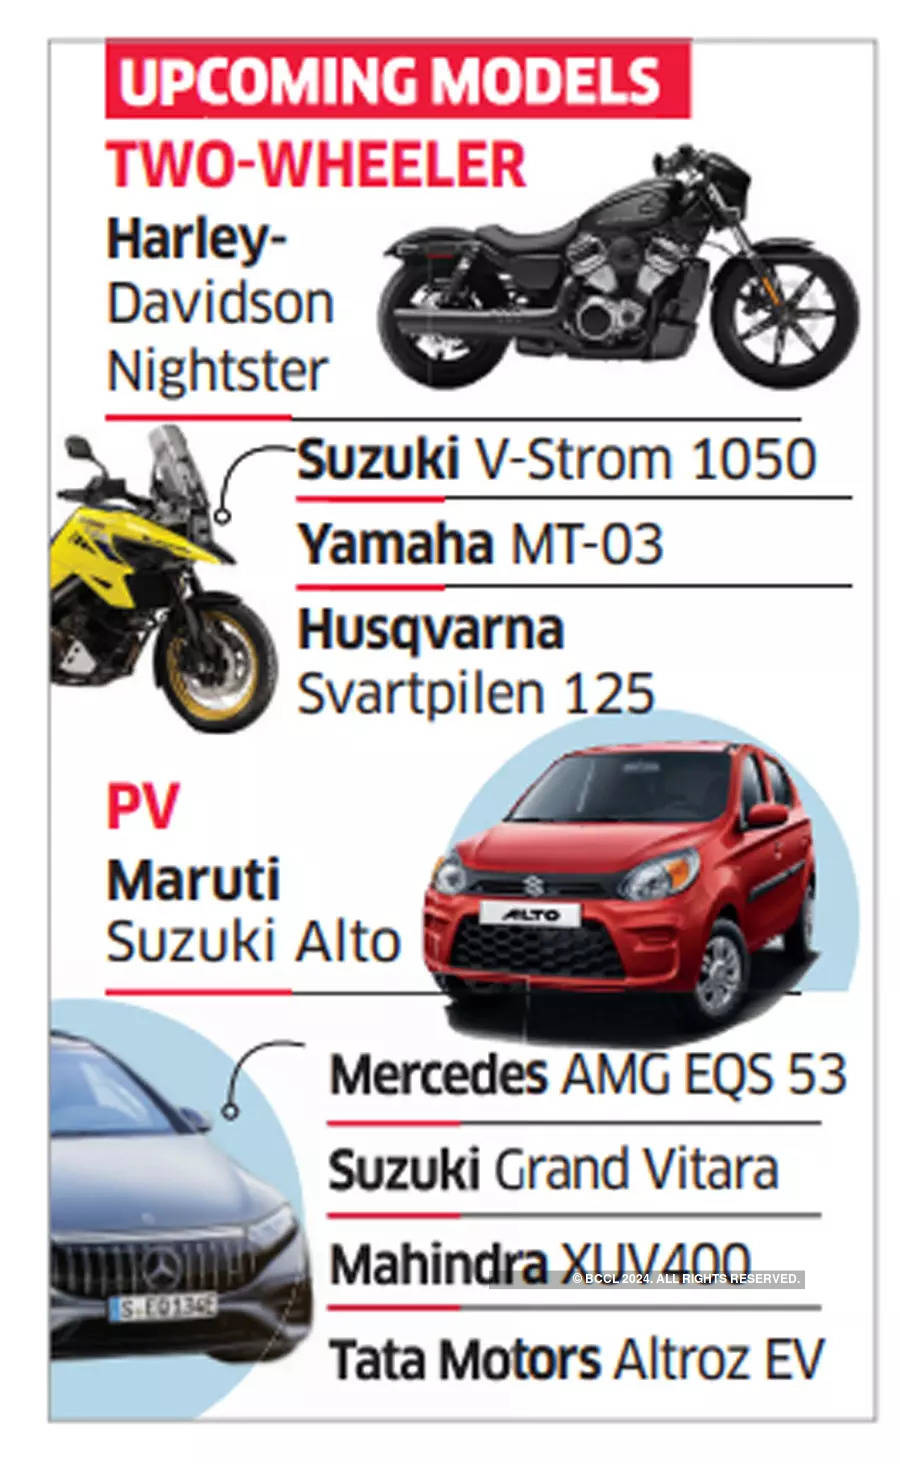 Chip shortage in the rear-view mirror, auto firms on launchpad - The  Economic Times